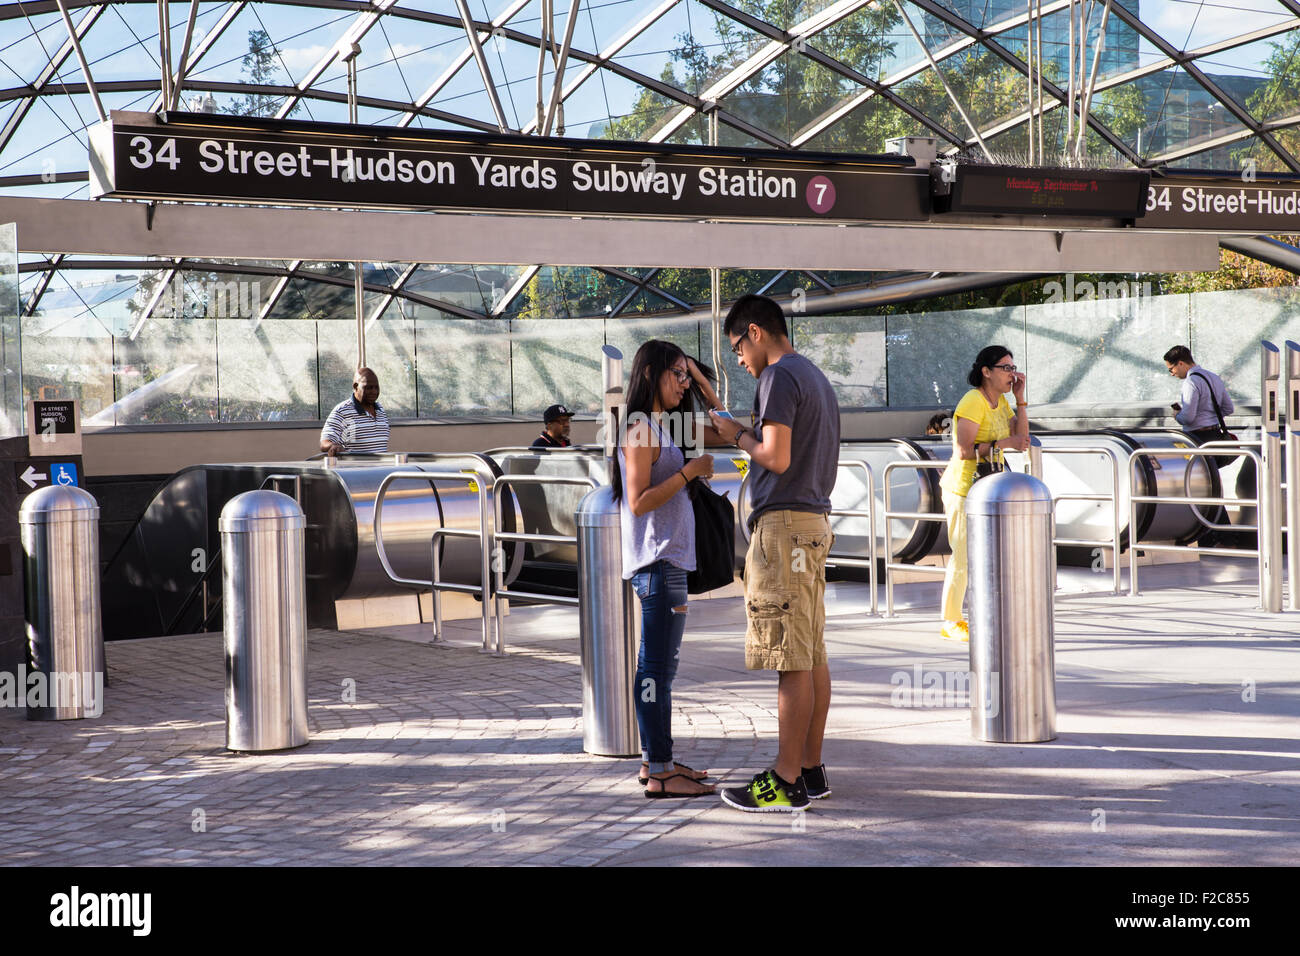 Street view at new Hudson Yards 7 train subway station with travelers visible. Stock Photo